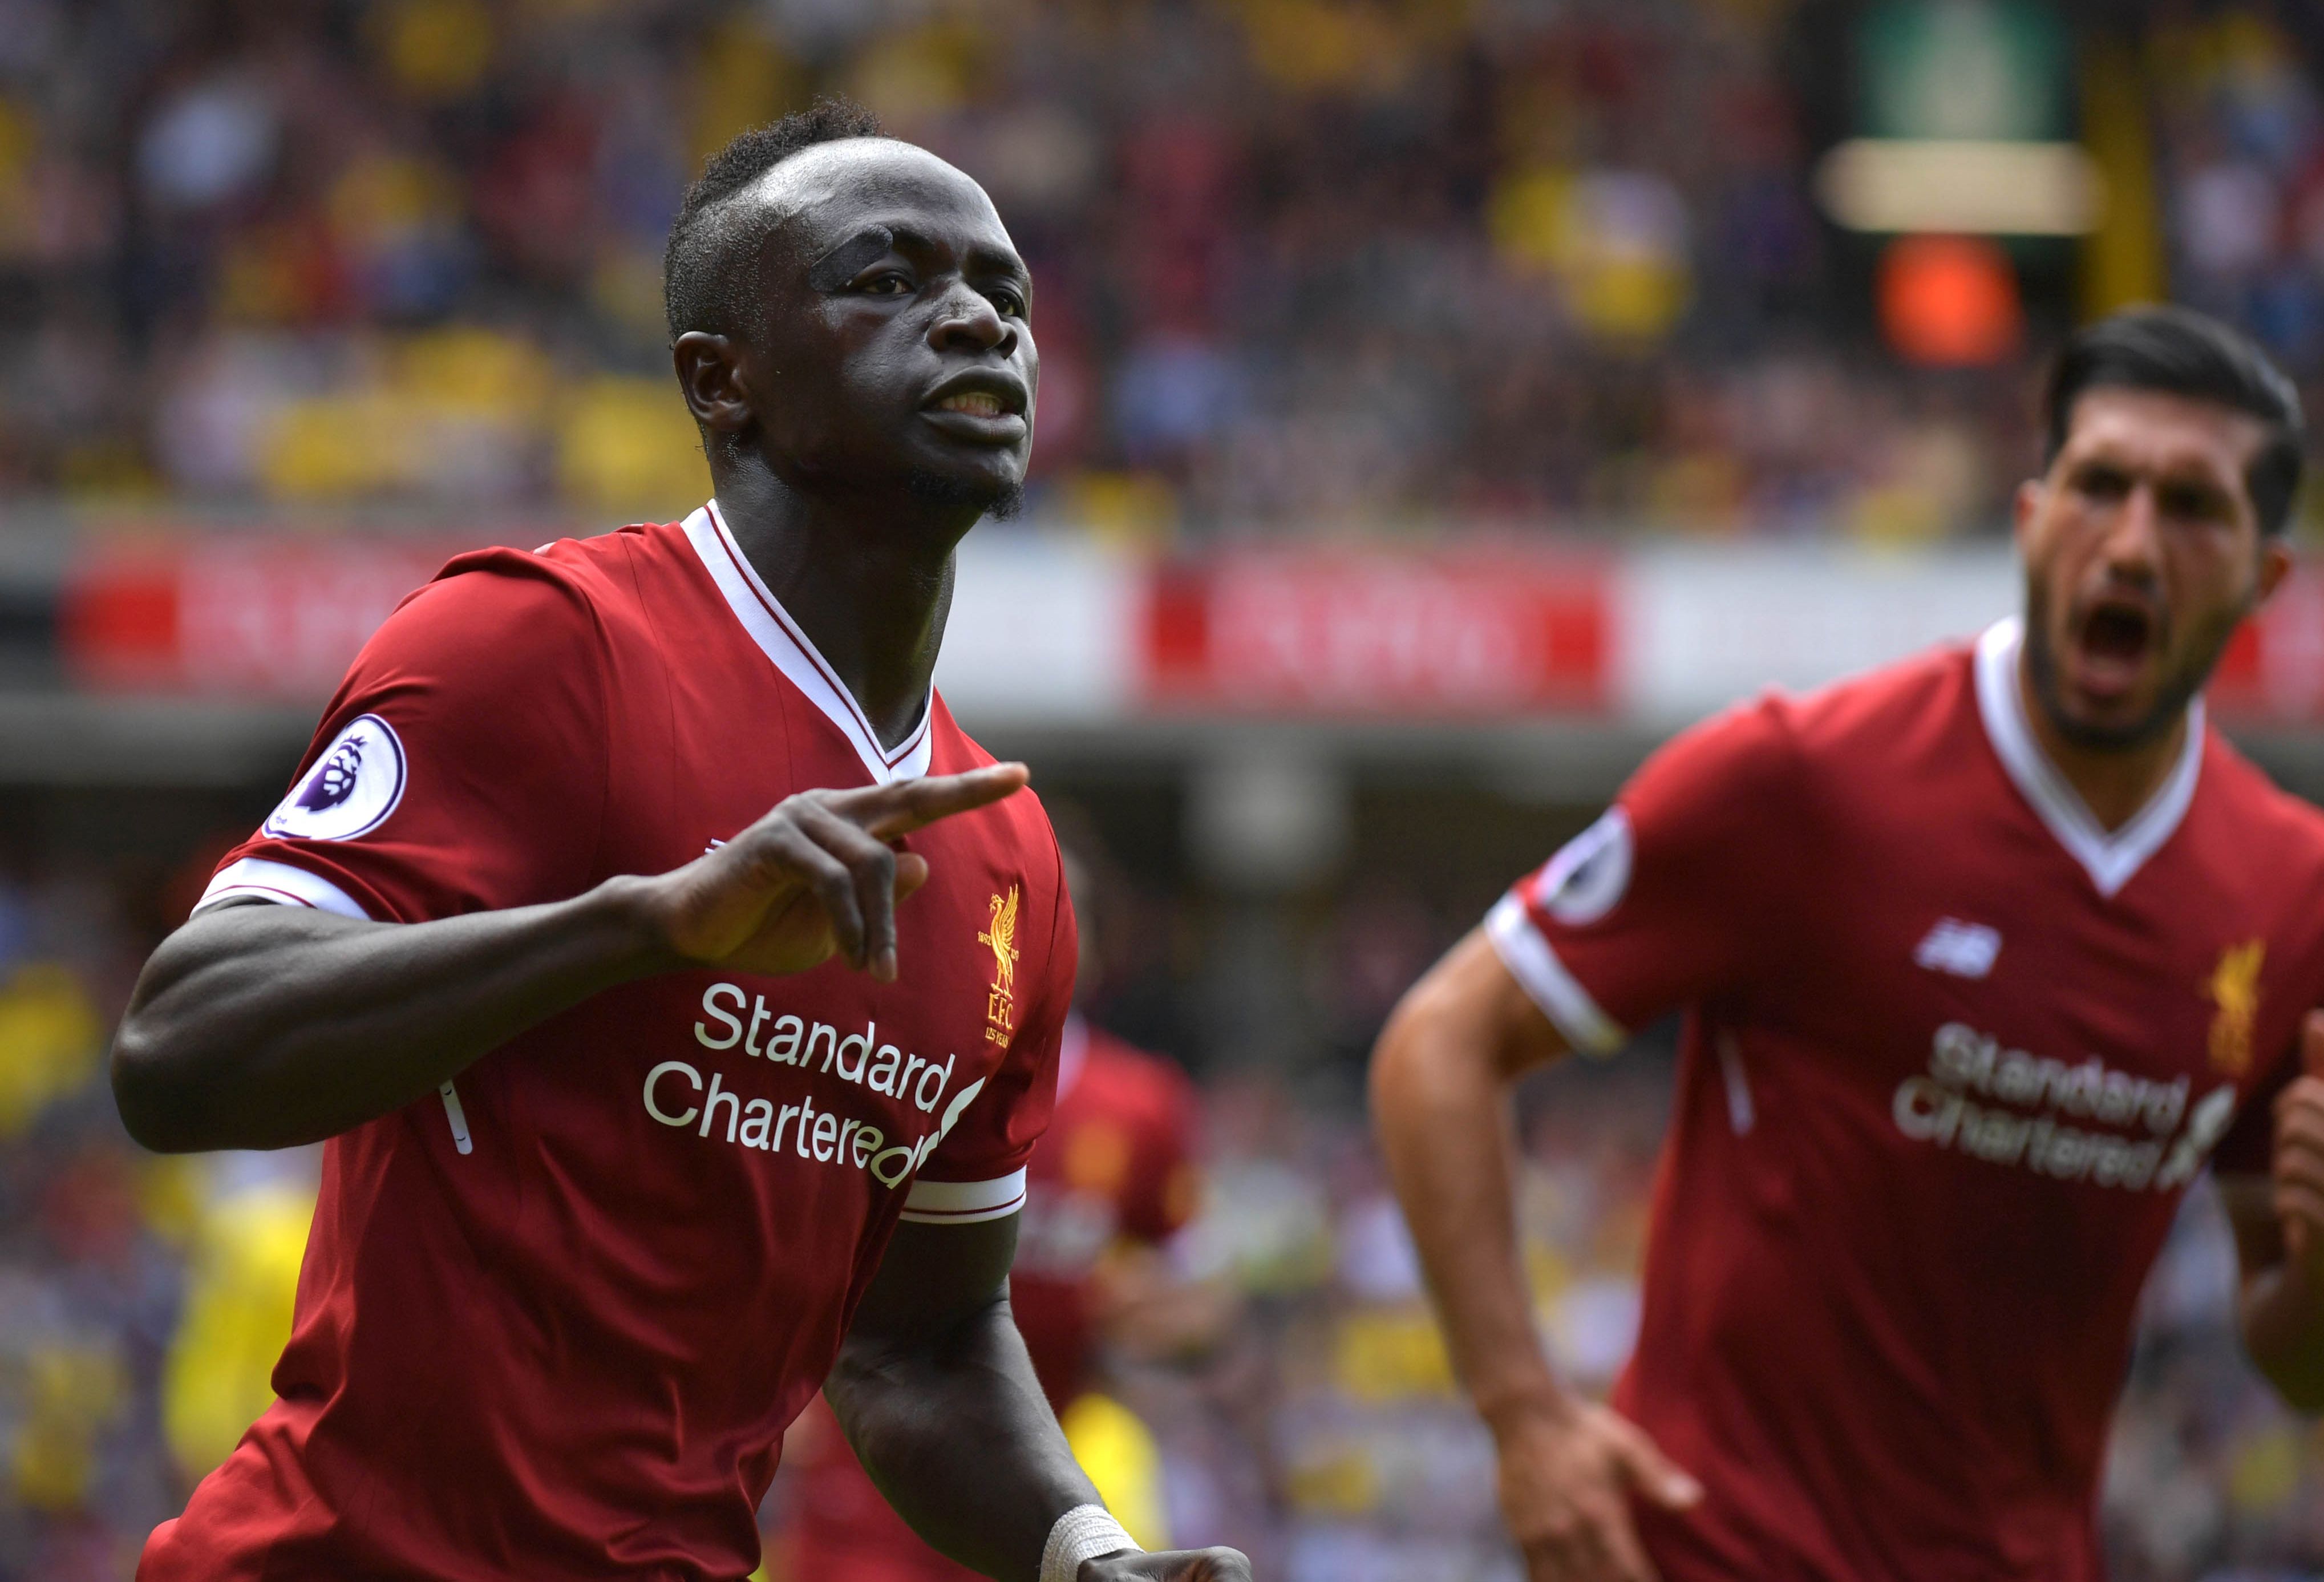 Liverpool's Senegalese midfielder Sadio Mane (l) celebrates scoring his team's second goal during the English Premier League football match between Watford and Liverpool at Vicarage Road Stadium in Watford, north of London on August 12, 2017. / AFP PHOTO / OLLY GREENWOOD / RESTRICTED TO EDITORIAL USE. No use with unauthorized audio, video, data, fixture lists, club/league logos or 'live' services. Online in-match use limited to 75 images, no video emulation. No use in betting, games or single club/league/player publications.  /         (Photo credit should read OLLY GREENWOOD/AFP/Getty Images)